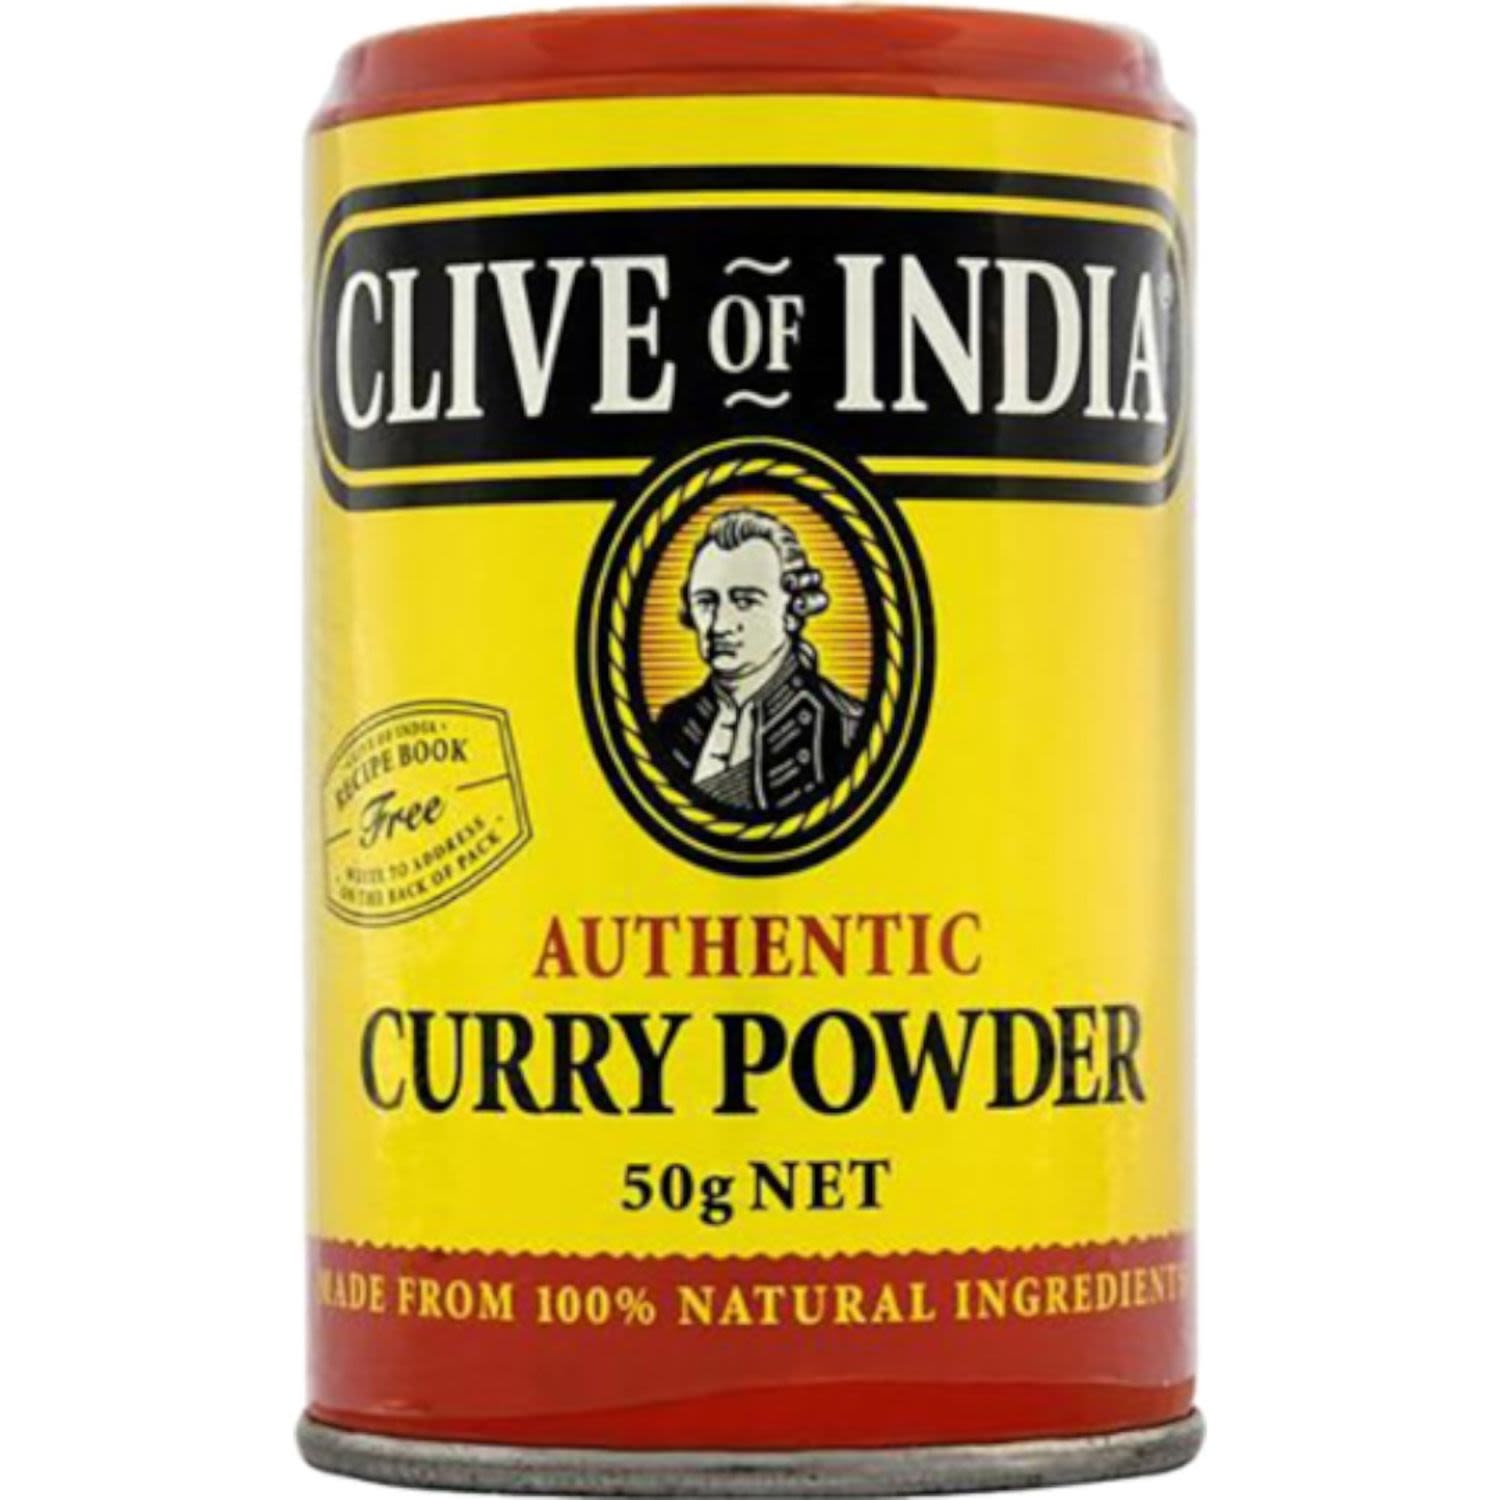 Clive of India Curry Powder, 50 Gram